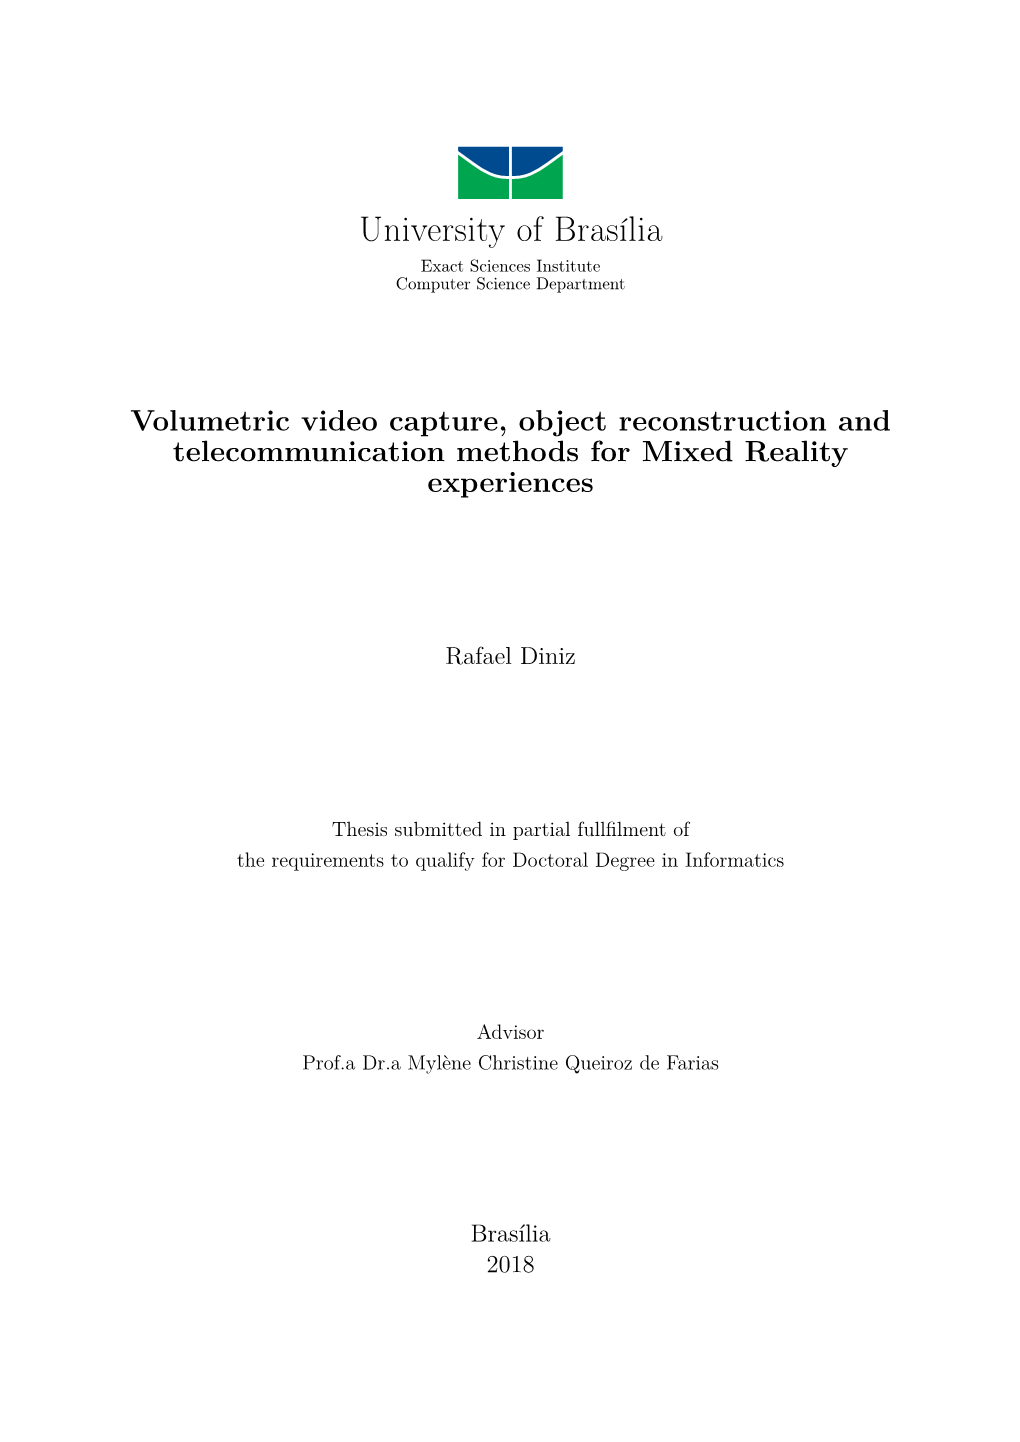 Volumetric Video Capture, Object Reconstruction and Telecommunication Methods for Mixed Reality Experiences